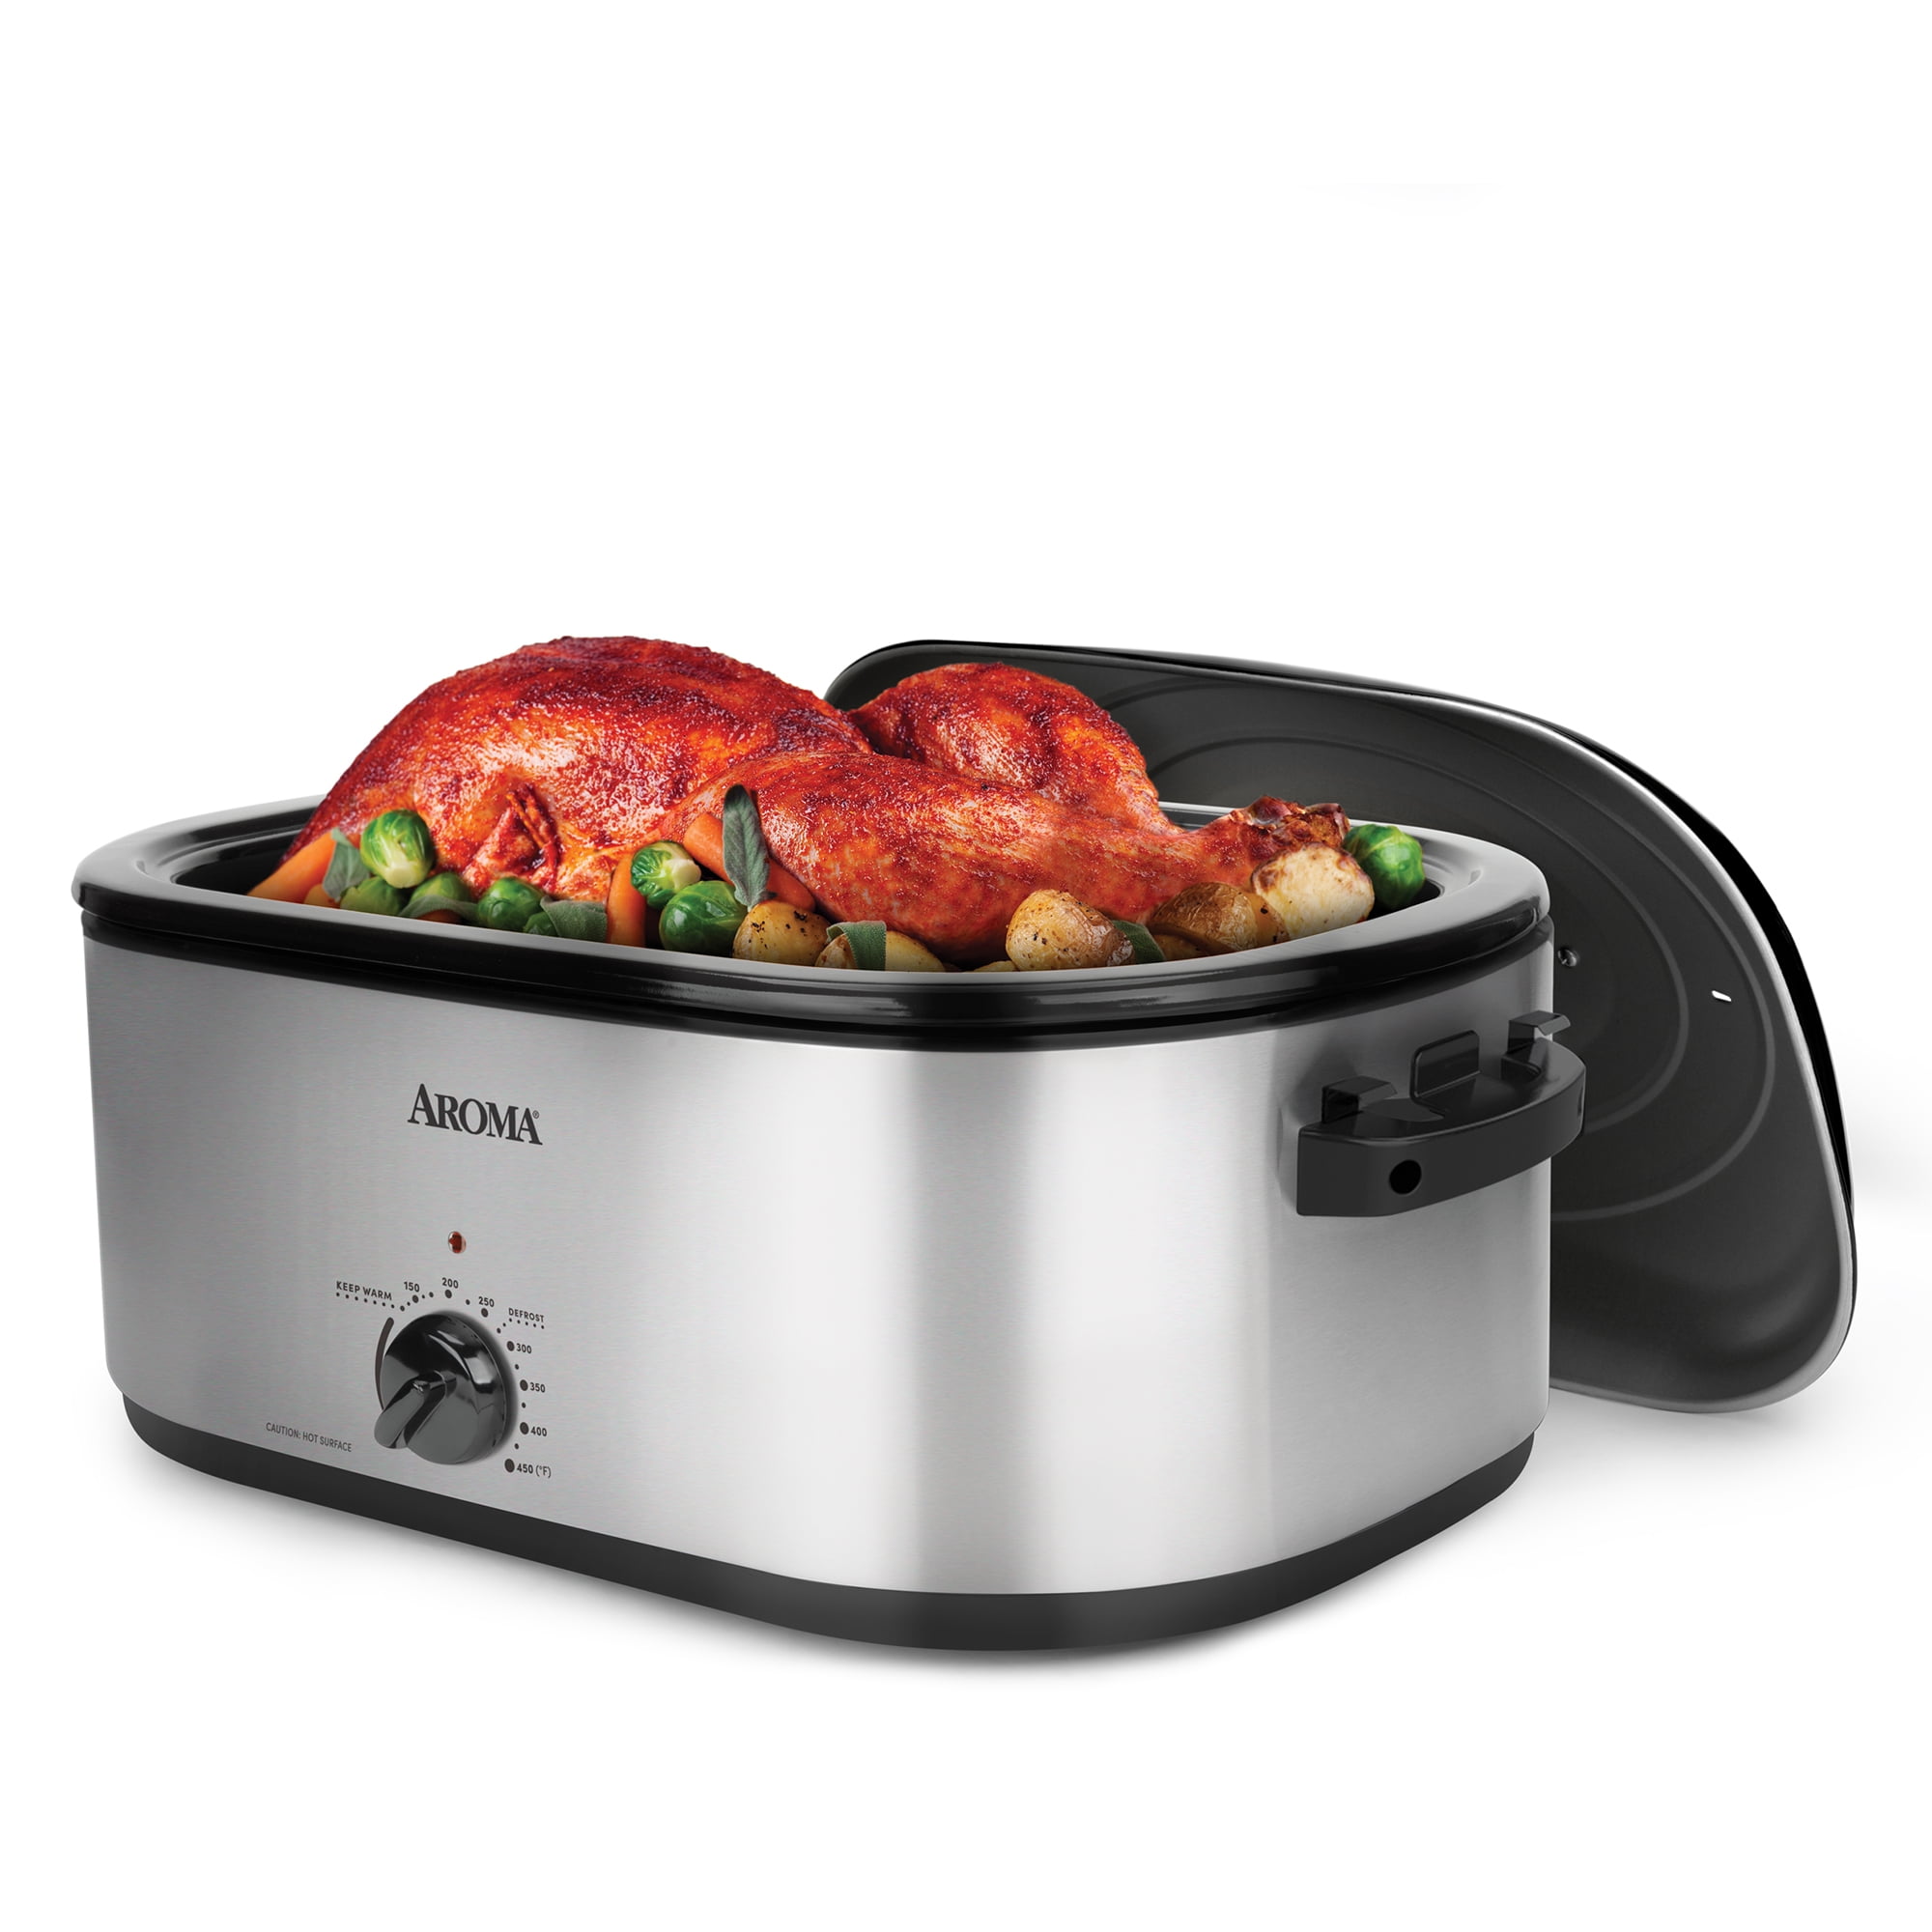 Hamilton 22 qt Roaster Oven Turkey Stainless Steel Oven Cooker with Lid Pan 